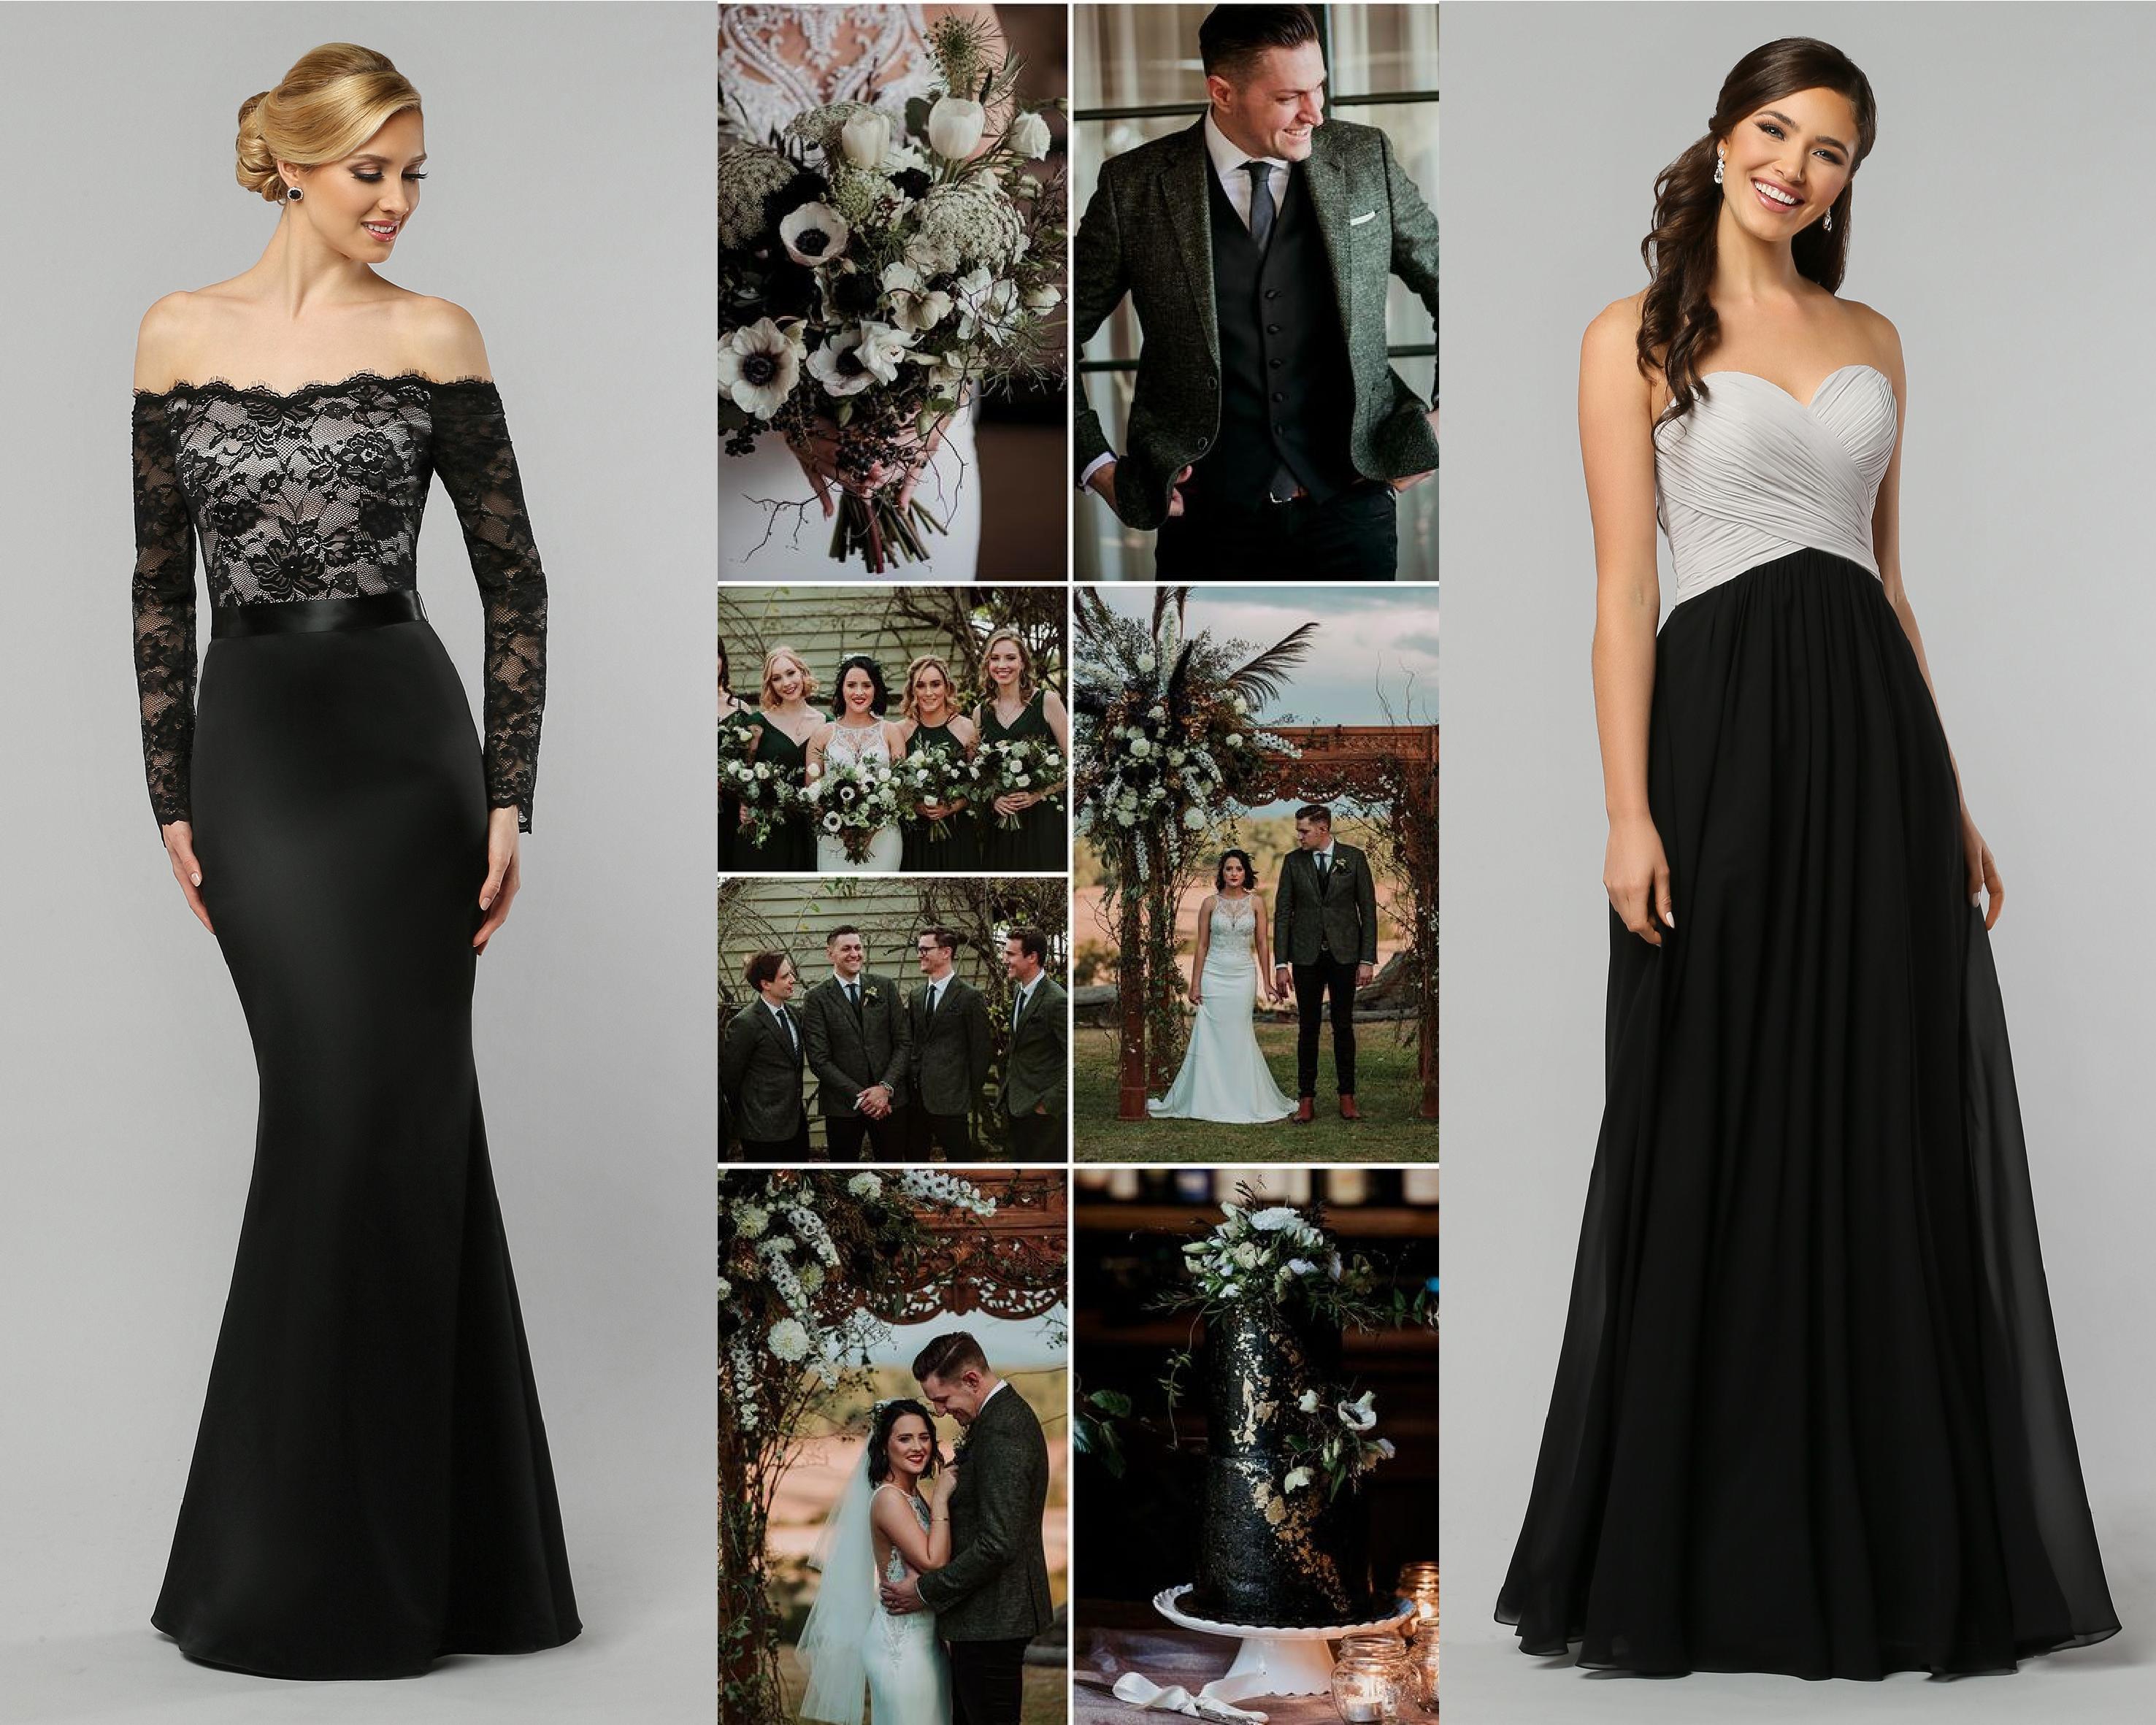 black and white lace bridesmaid dresses